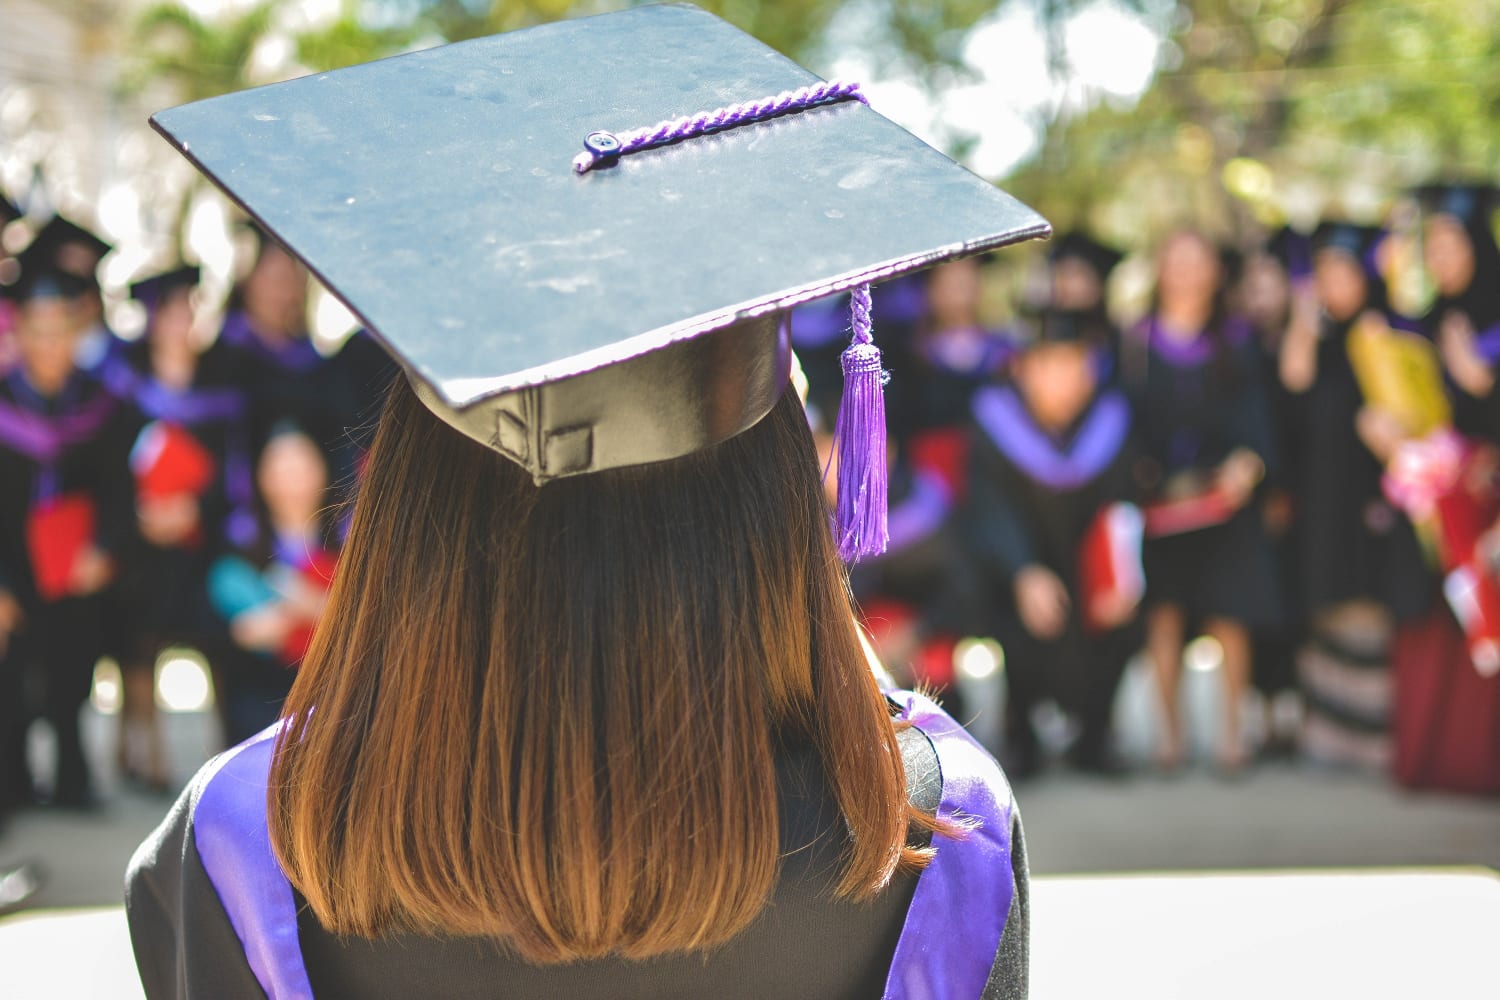 Recent Graduates: Here's Some Financial Advice